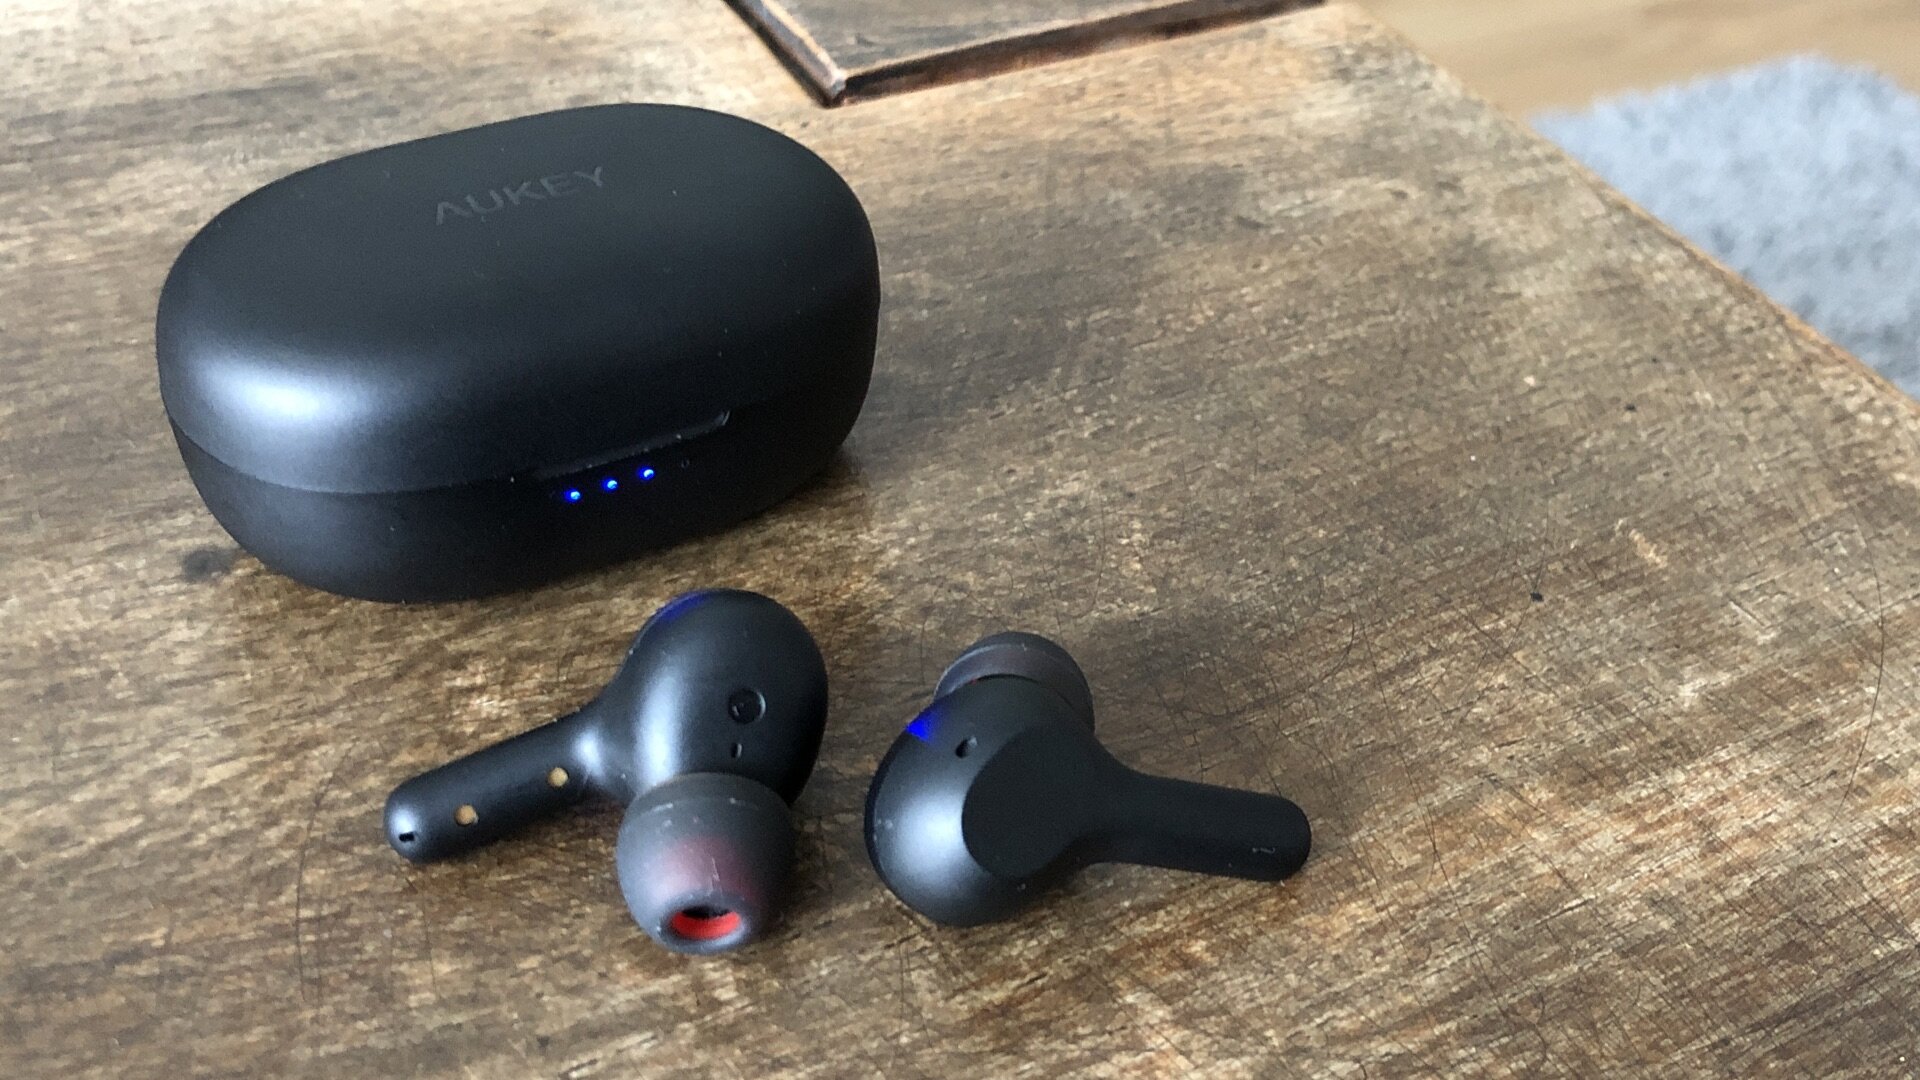 Aukey review: Is the loudest cheap